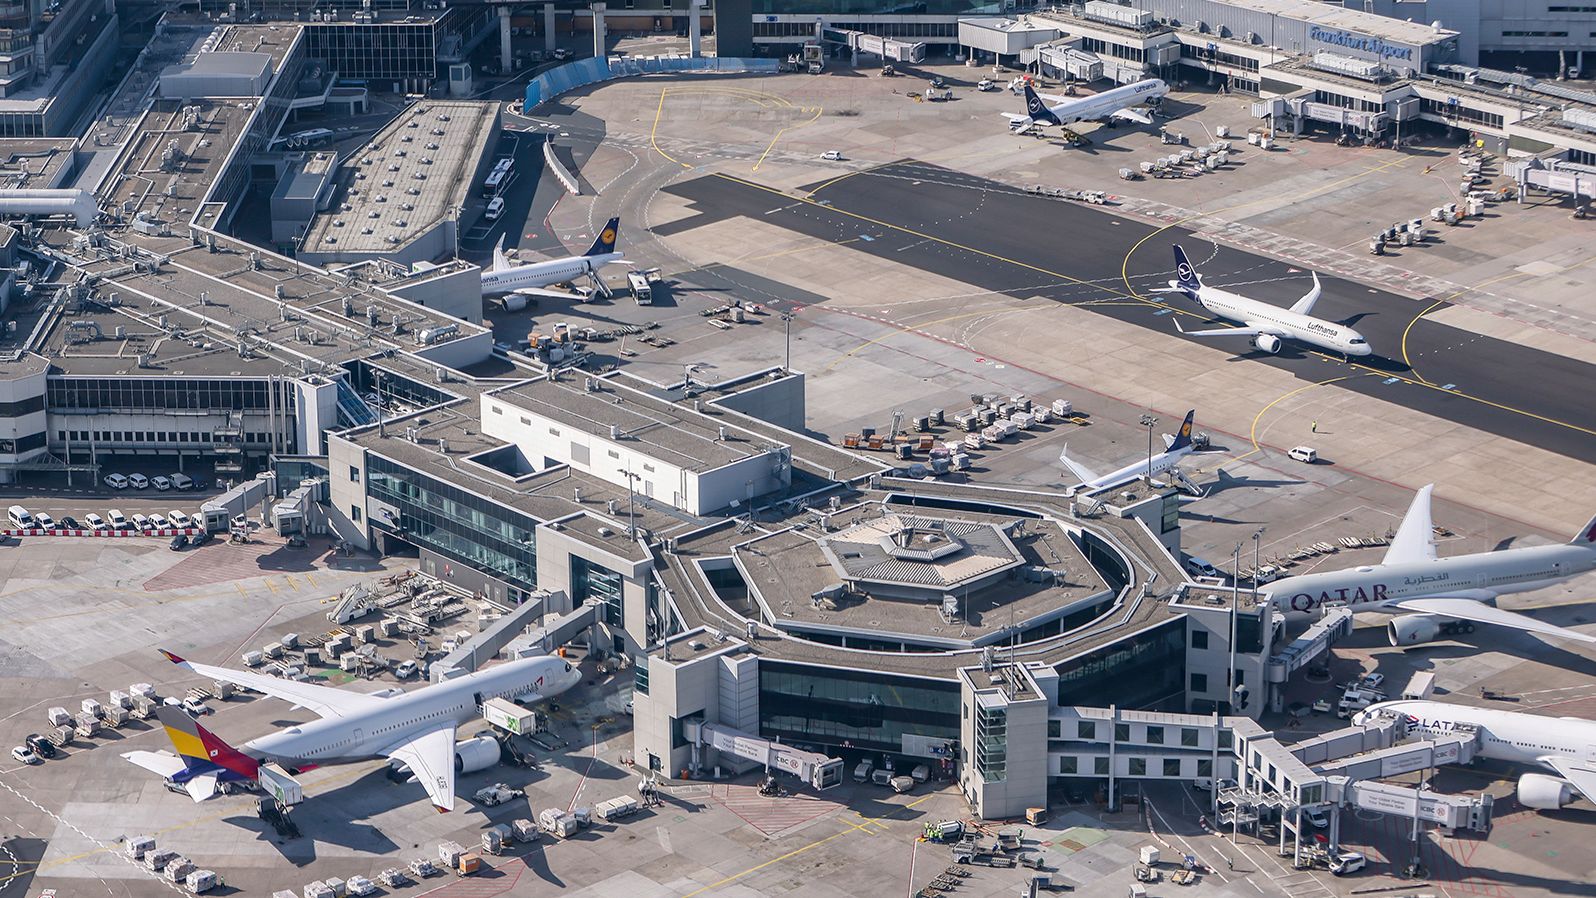 Frankfurt airport in Germany, where a body was discovered in a plane's undercarriage on Thursday.